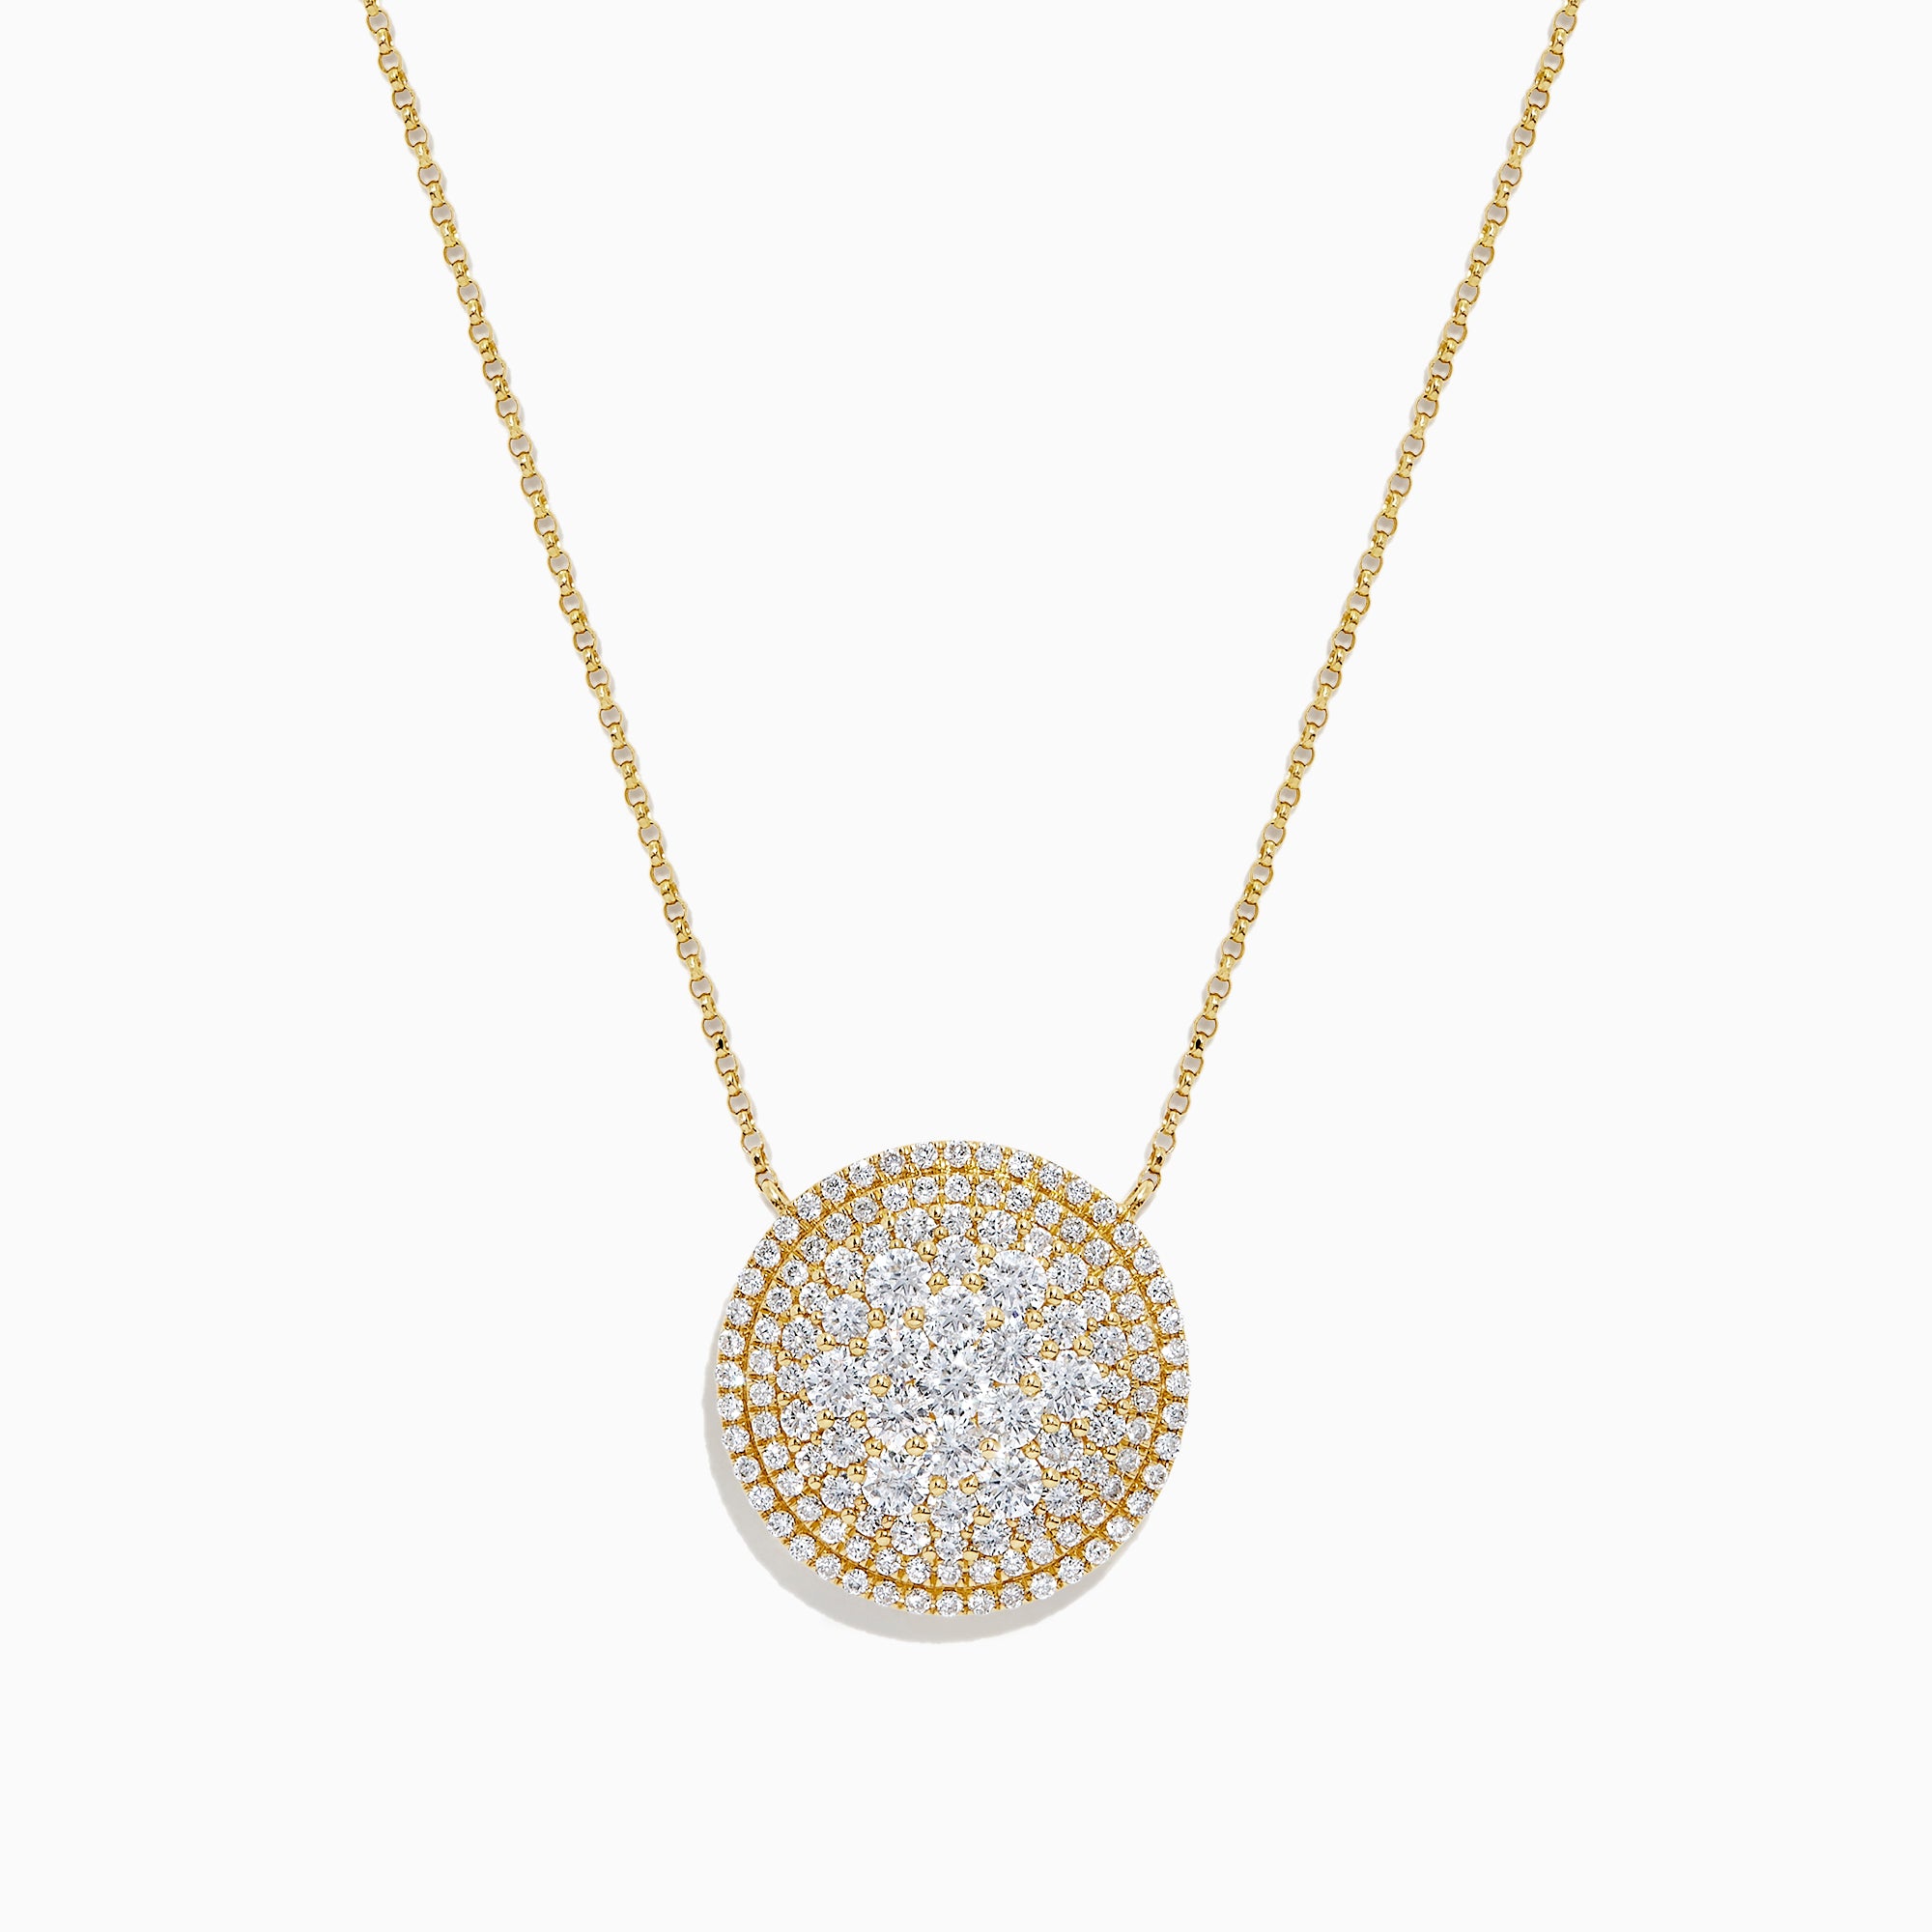 Effy D'Oro 14K Yellow Gold Diamond Pave Disk Necklace, 2.16 TCW